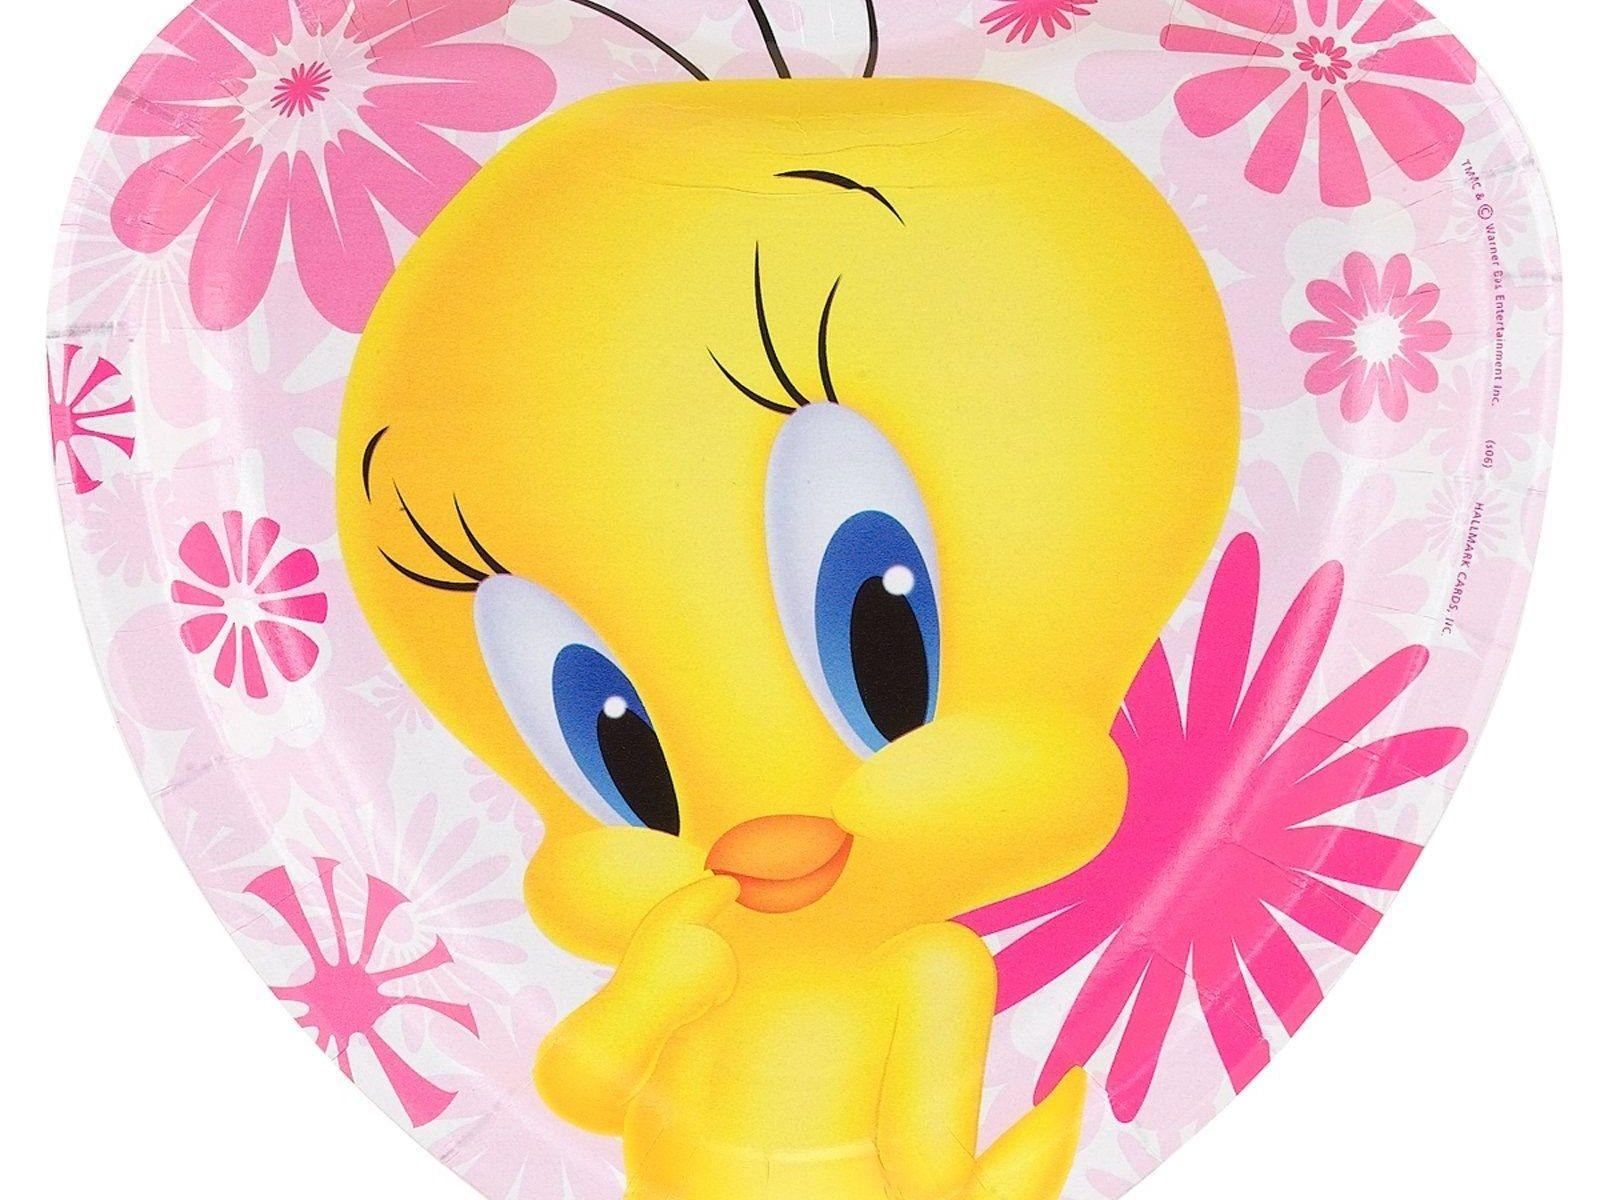 Baby Tweety Bird Picture HD Wallpaper And Picture Desktop Background